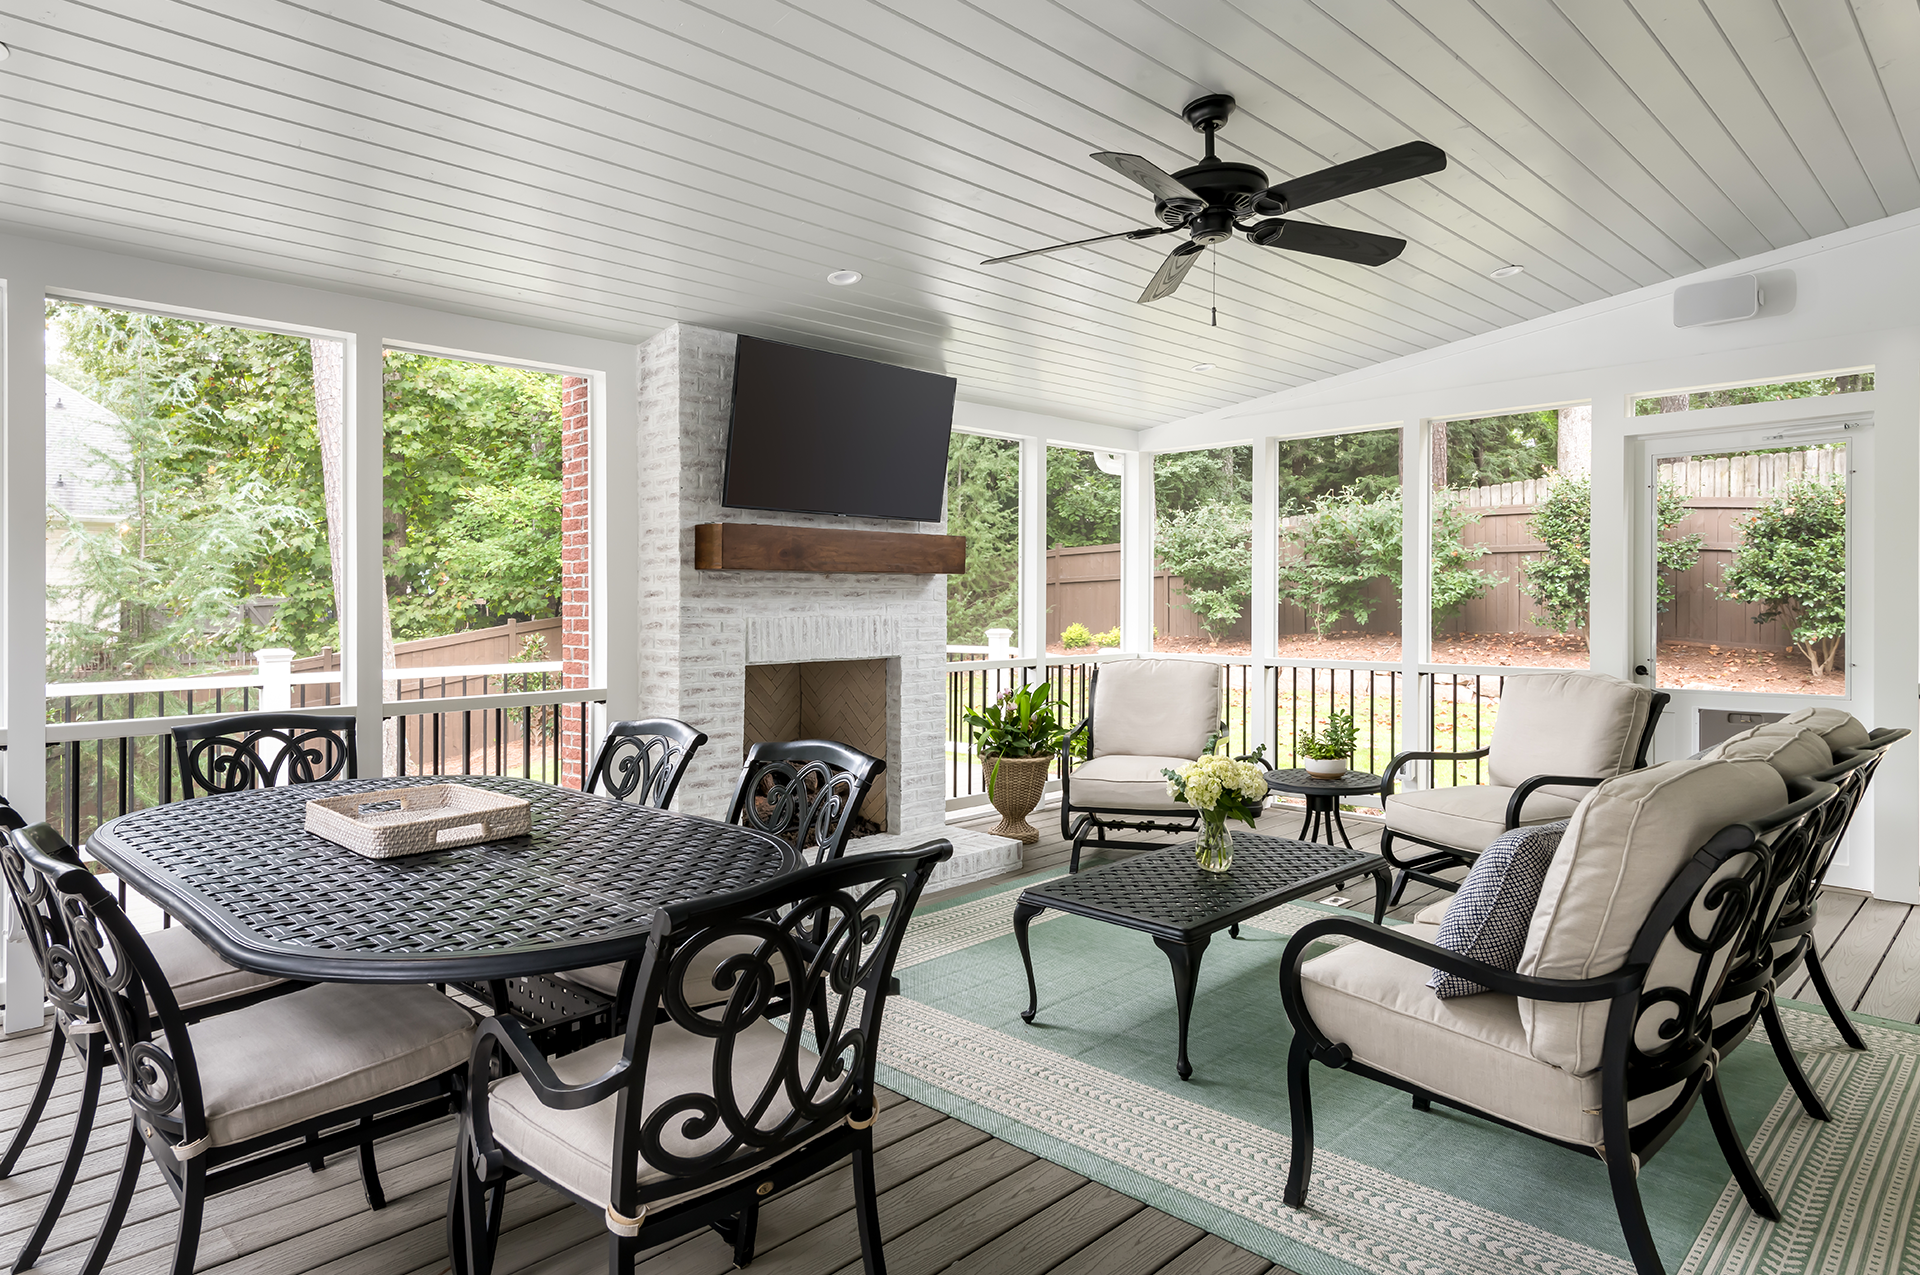 A newly remodeled screened porch with ample seating and TV